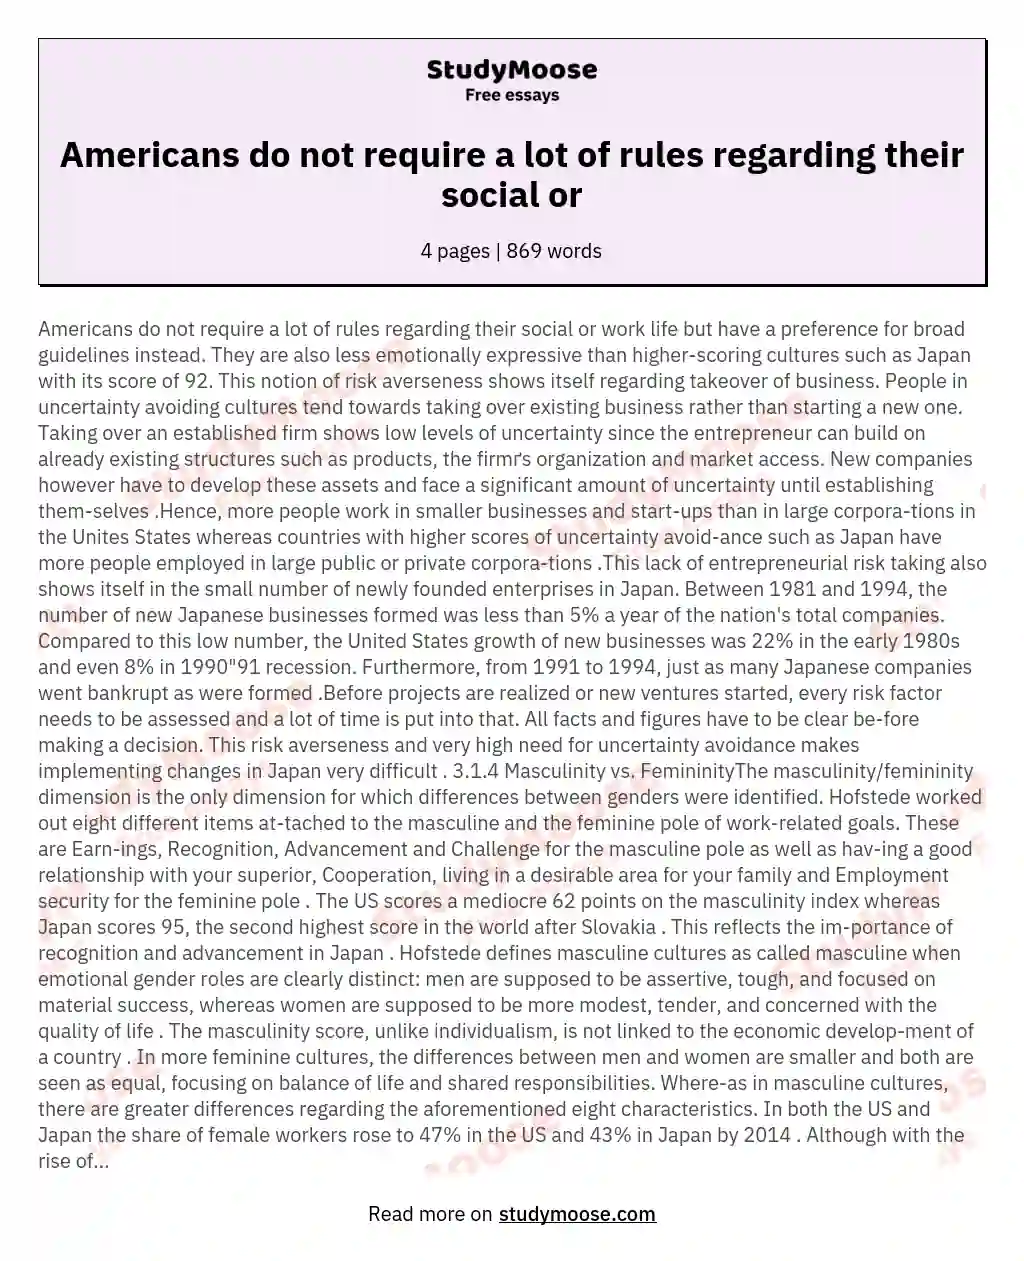 Americans do not require a lot of rules regarding their social or